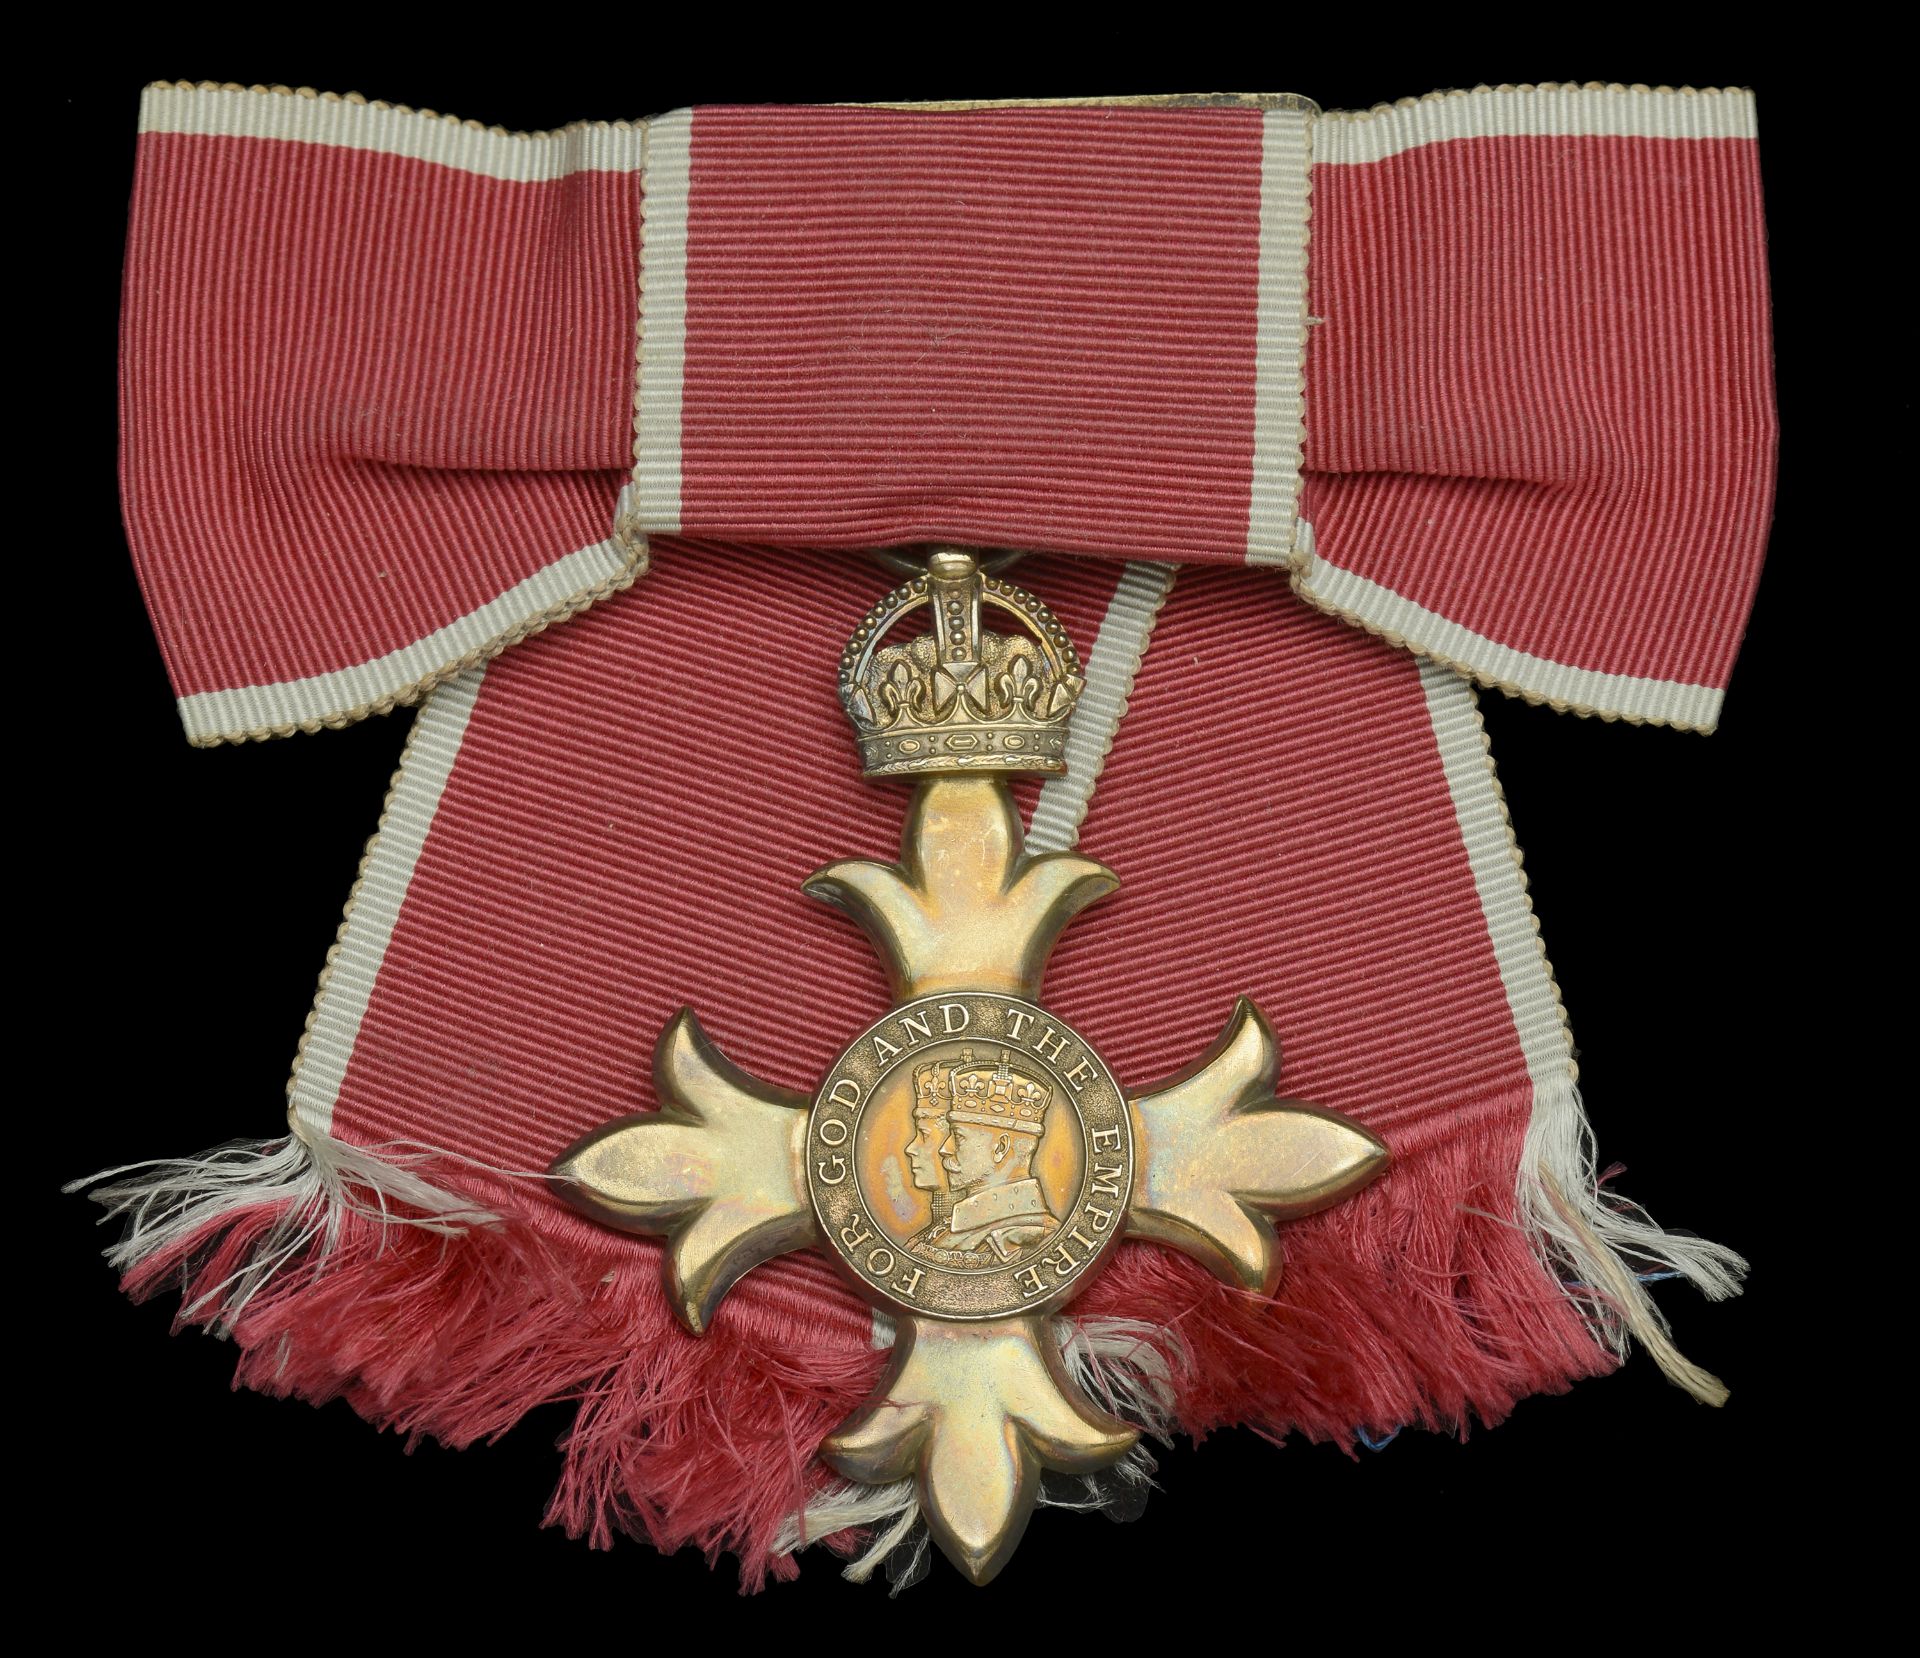 The Most Excellent Order of the British Empire, O.B.E. (Civil) Officer's 2nd type lady's sho...